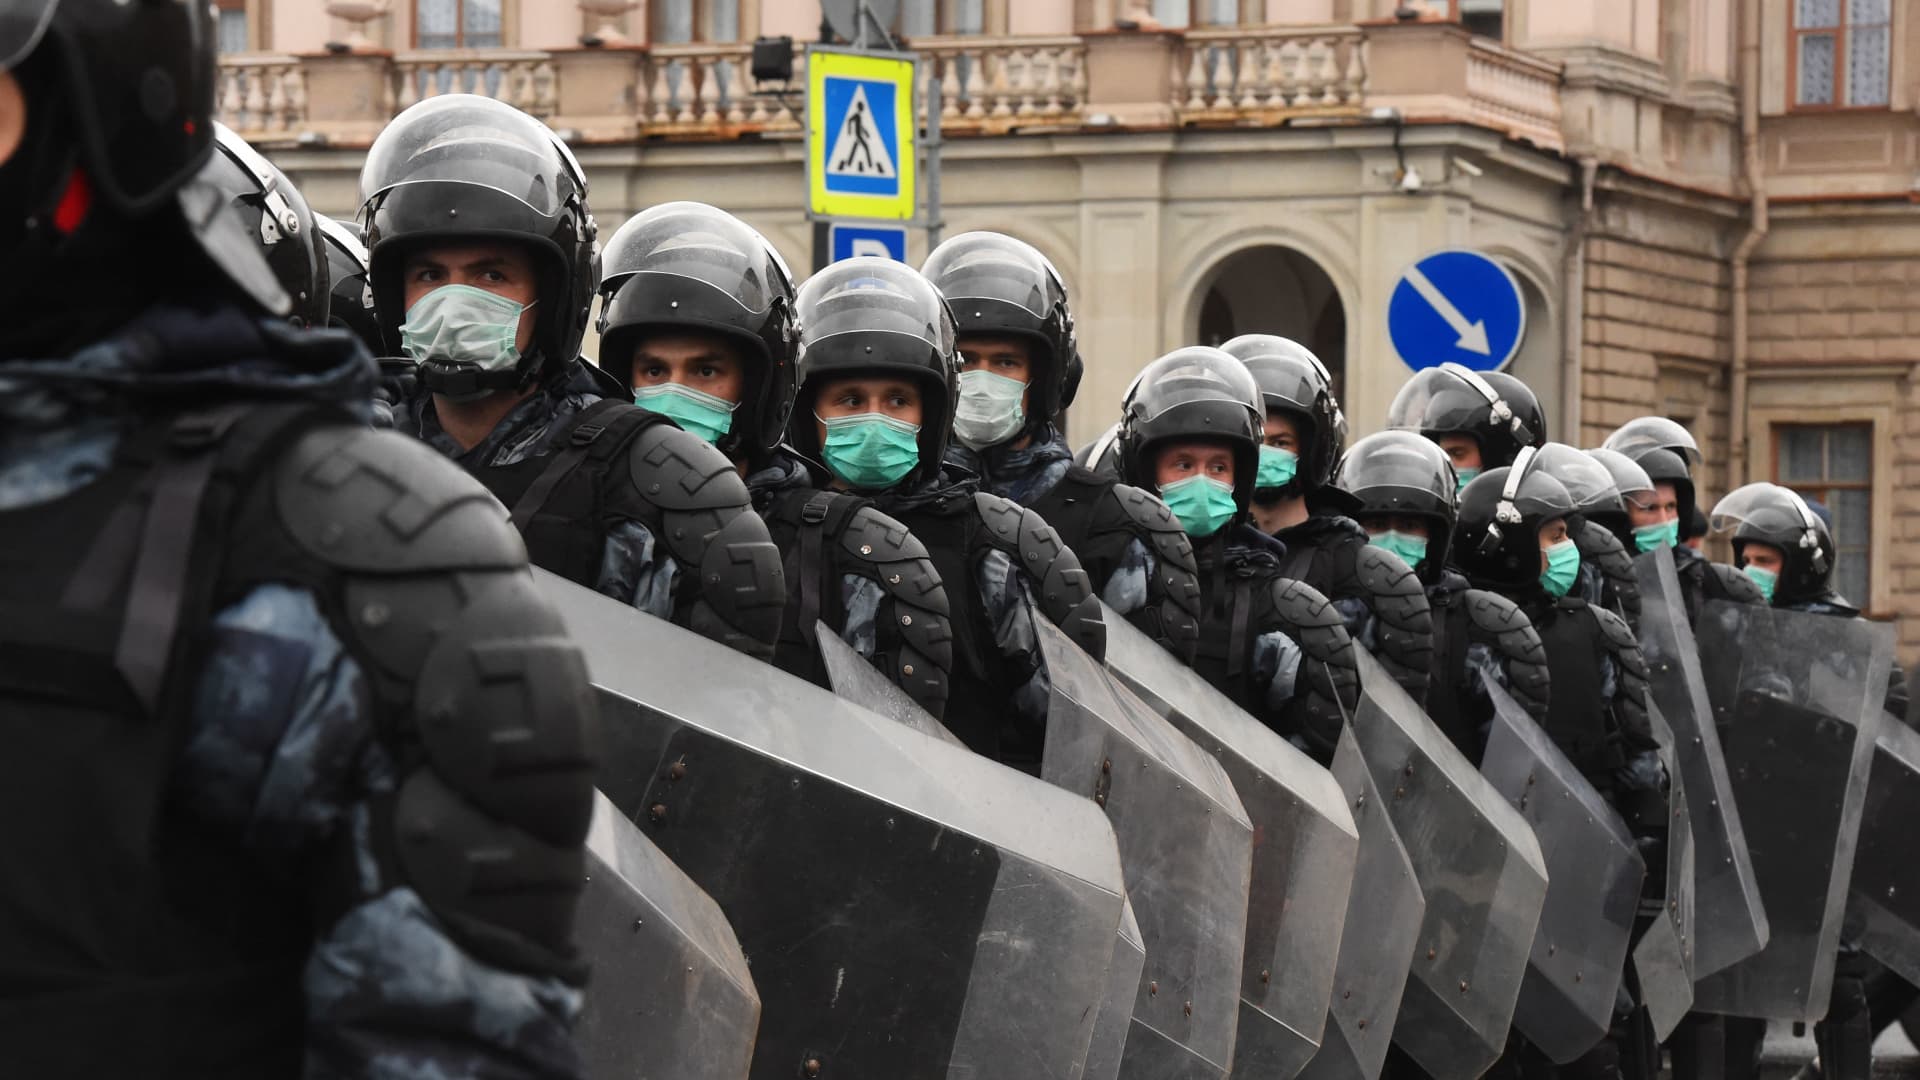 Russian riot police officers block a street during a rally in support of jailed Kremlin critic Alexei Navalny, in central Saint-Petersburg on April 21, 2021.